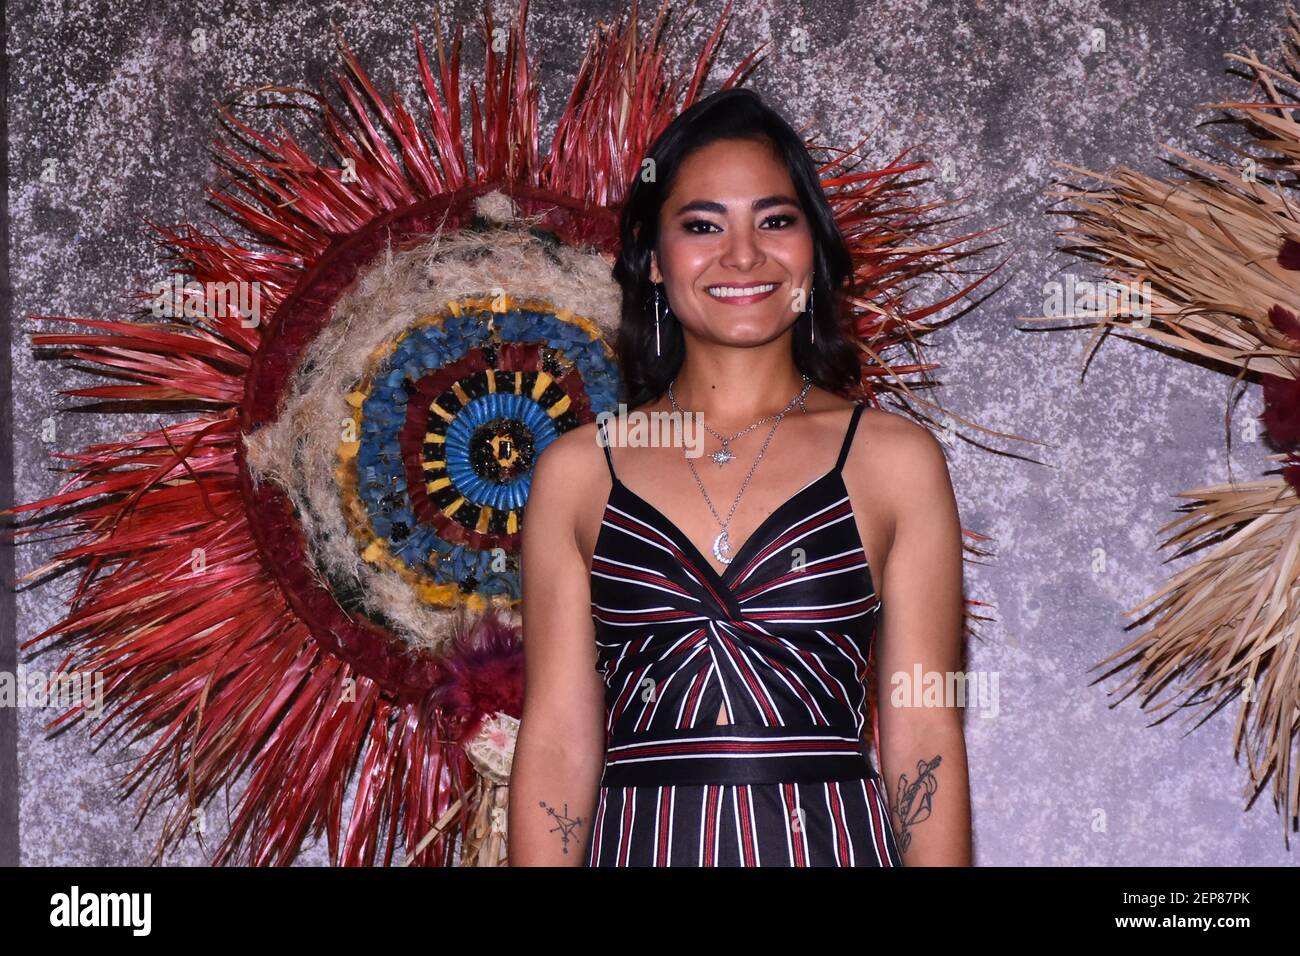 MEXICO CITY, MEXICO - NOVEMBER 13: Mitzi Mabel Cadena starring as  Tecuelhuetzin poses for photos during a Photocall as part of the launch of  the new Tv Series 'Hernan' which will be